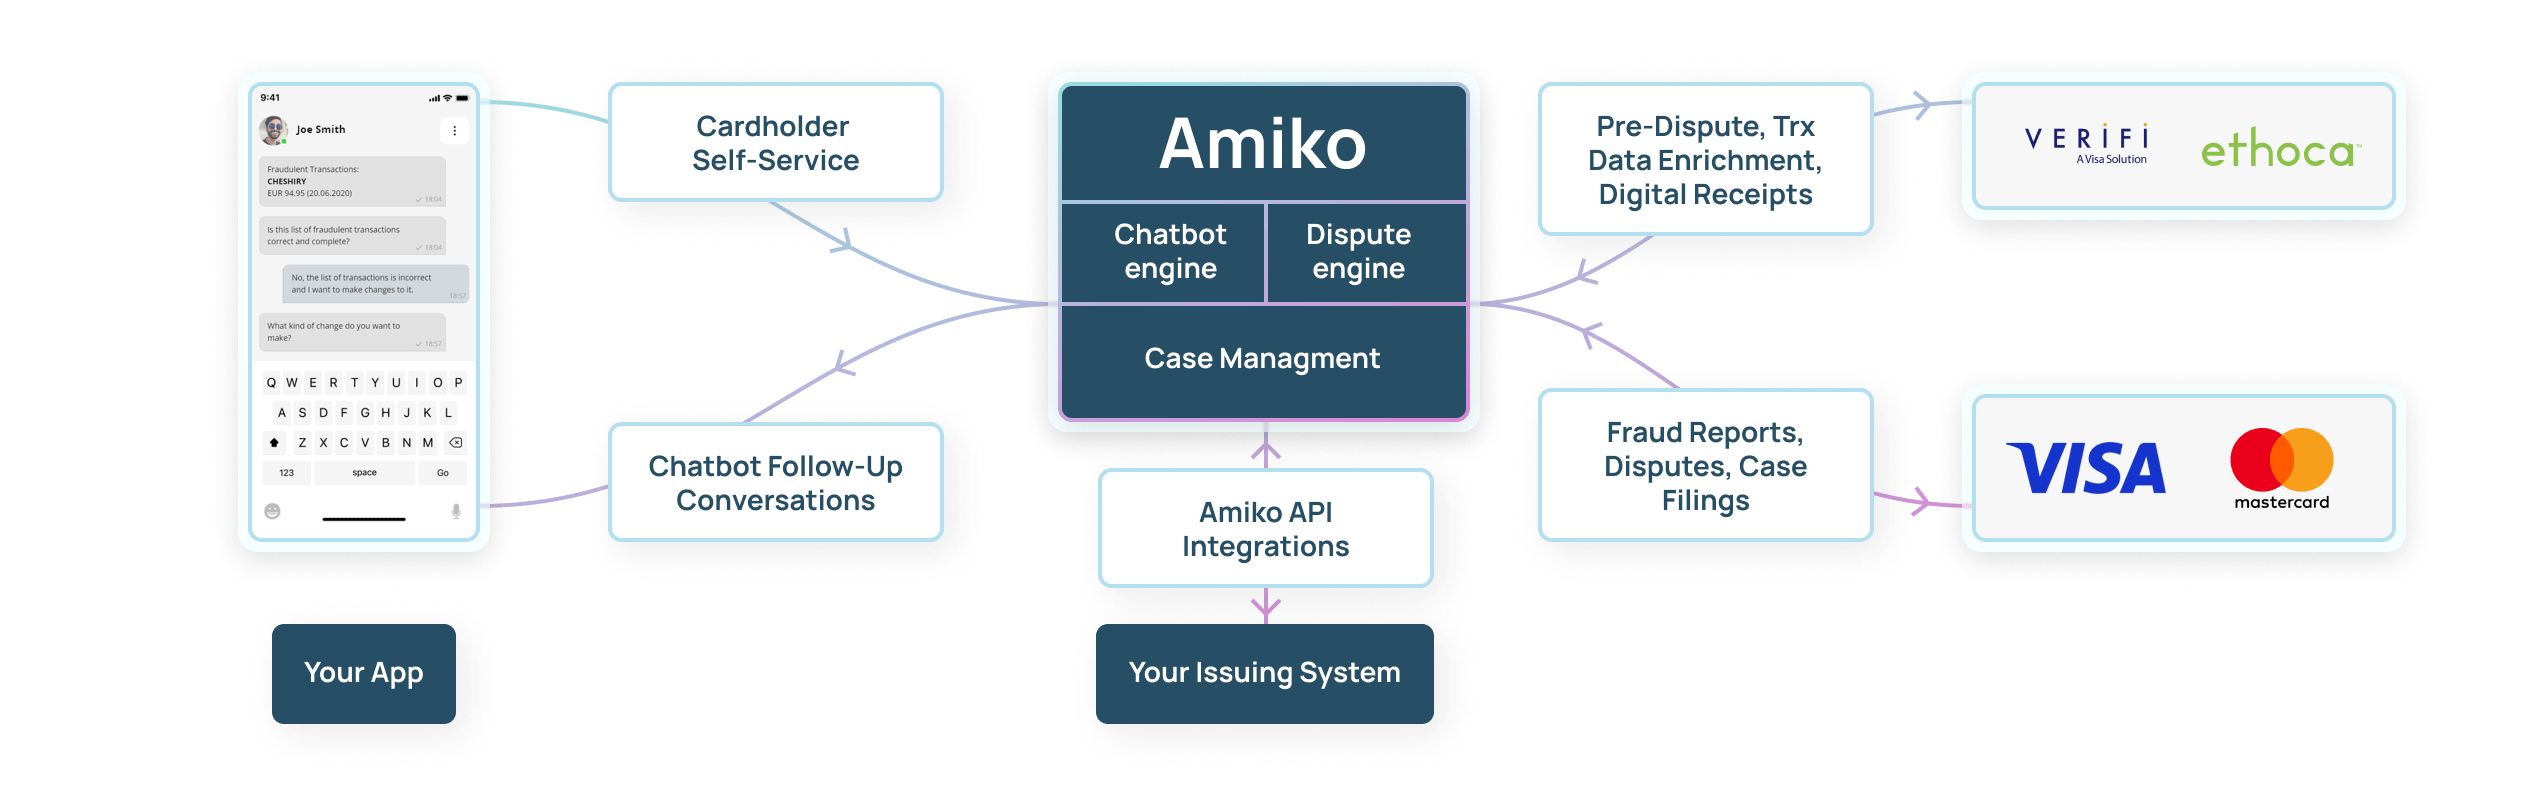 Amiko covers all your Fraud Recovery and Dispute Management needs. 

Including a chatbot for your cardholders.
